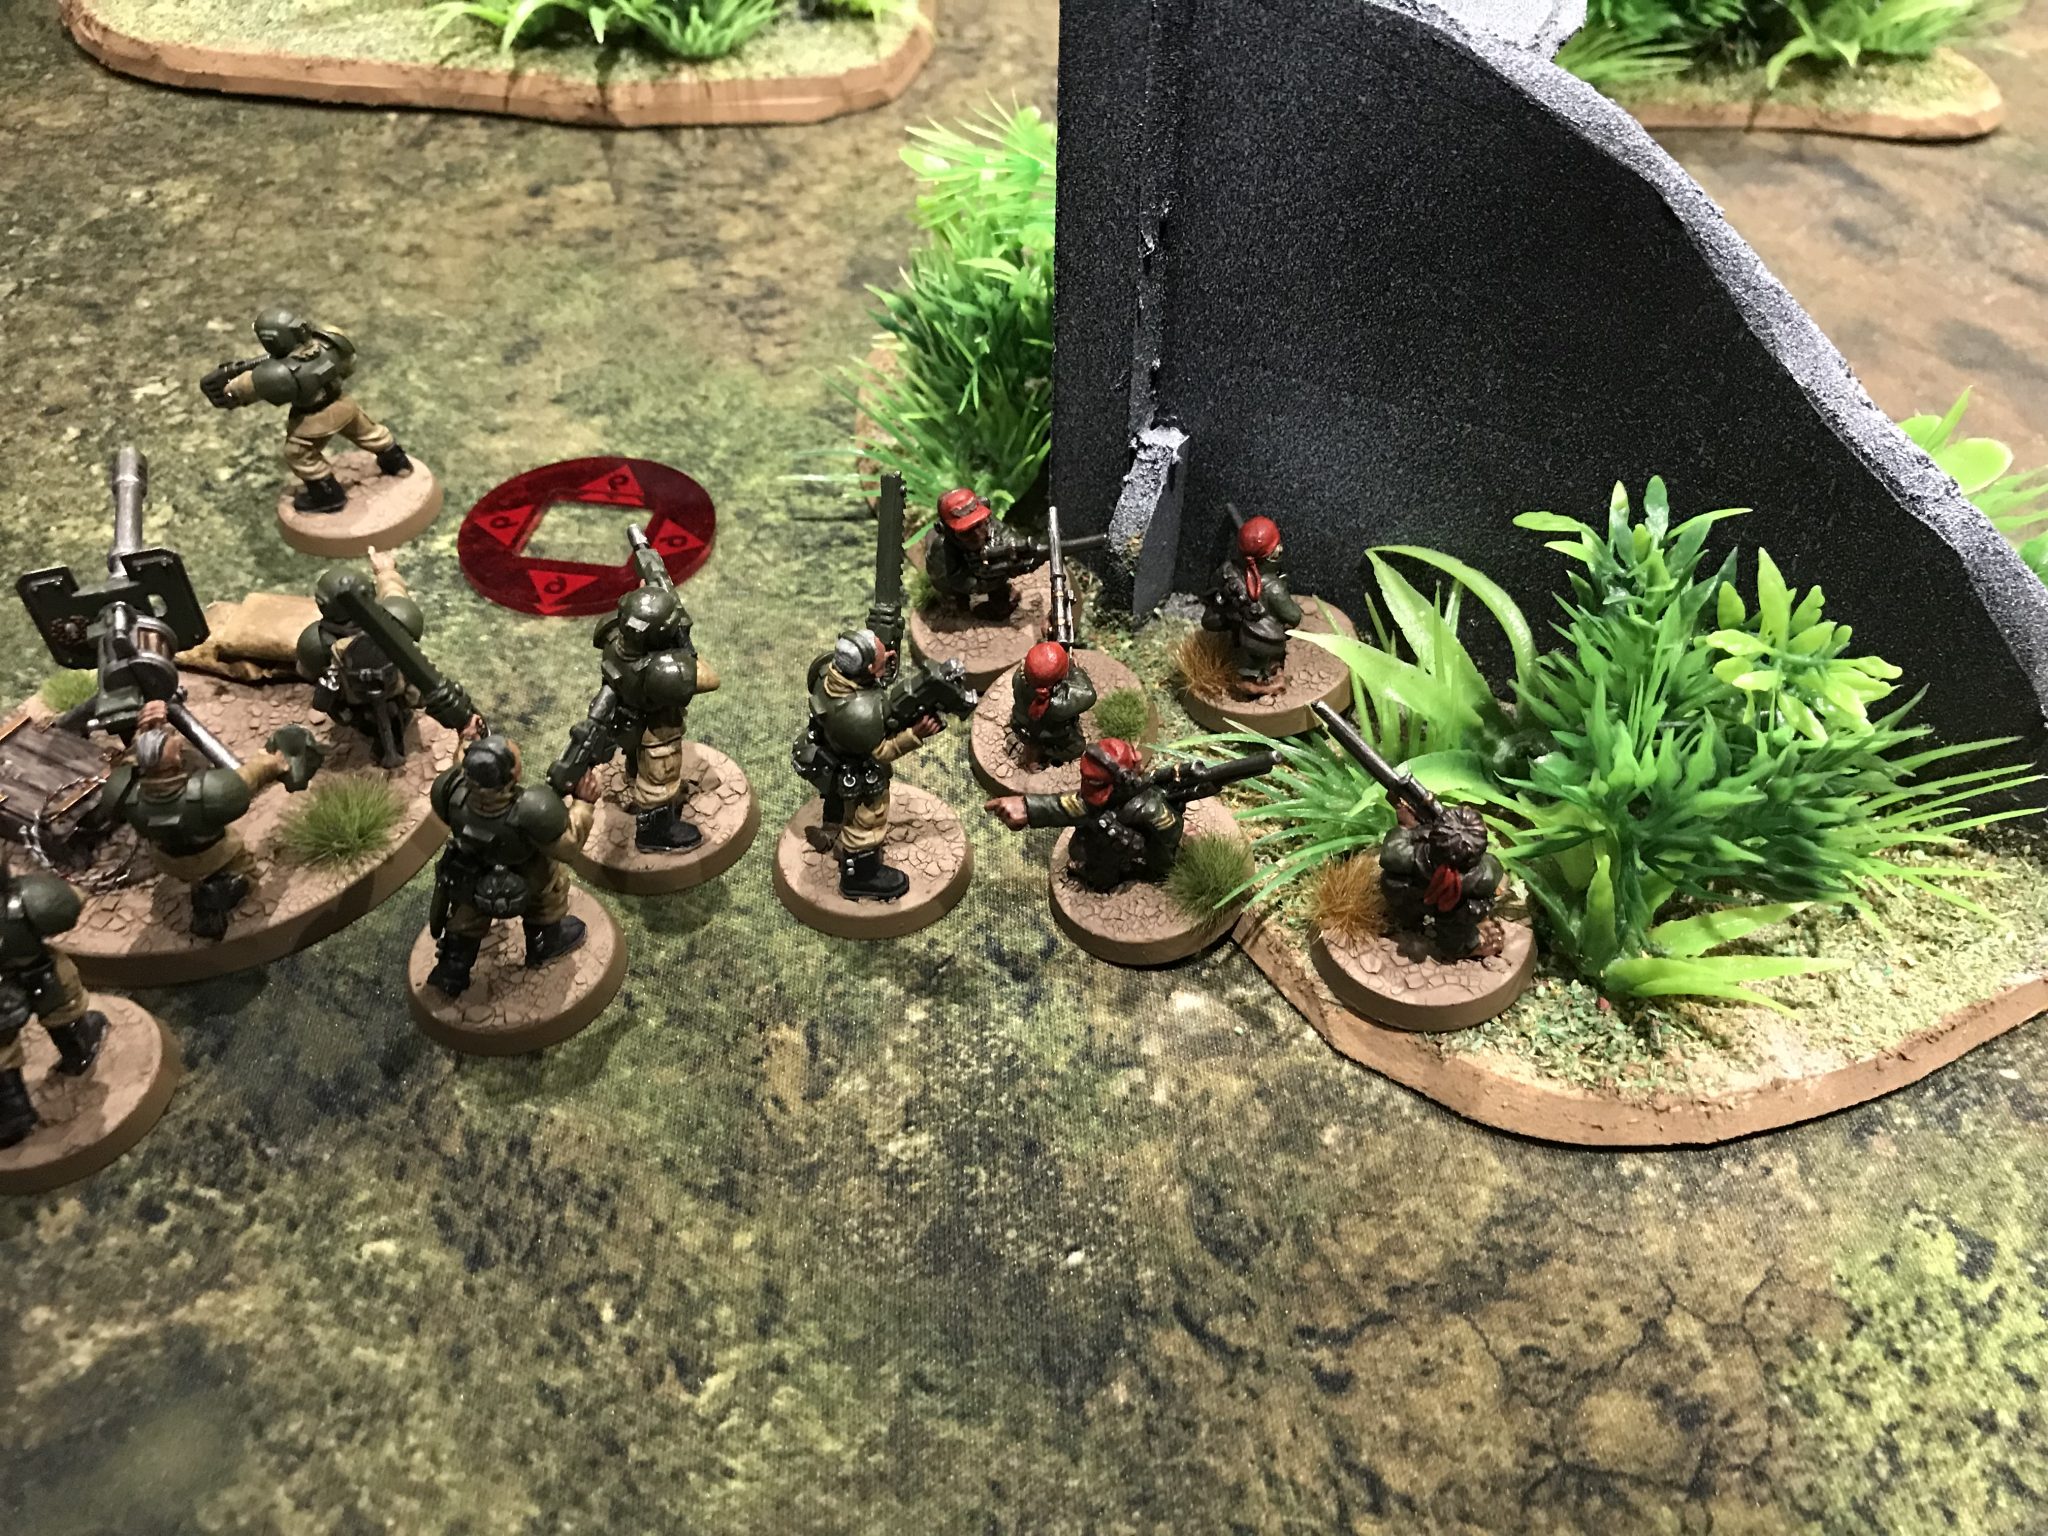 Ratlings and Guardsmen hold in the bushes